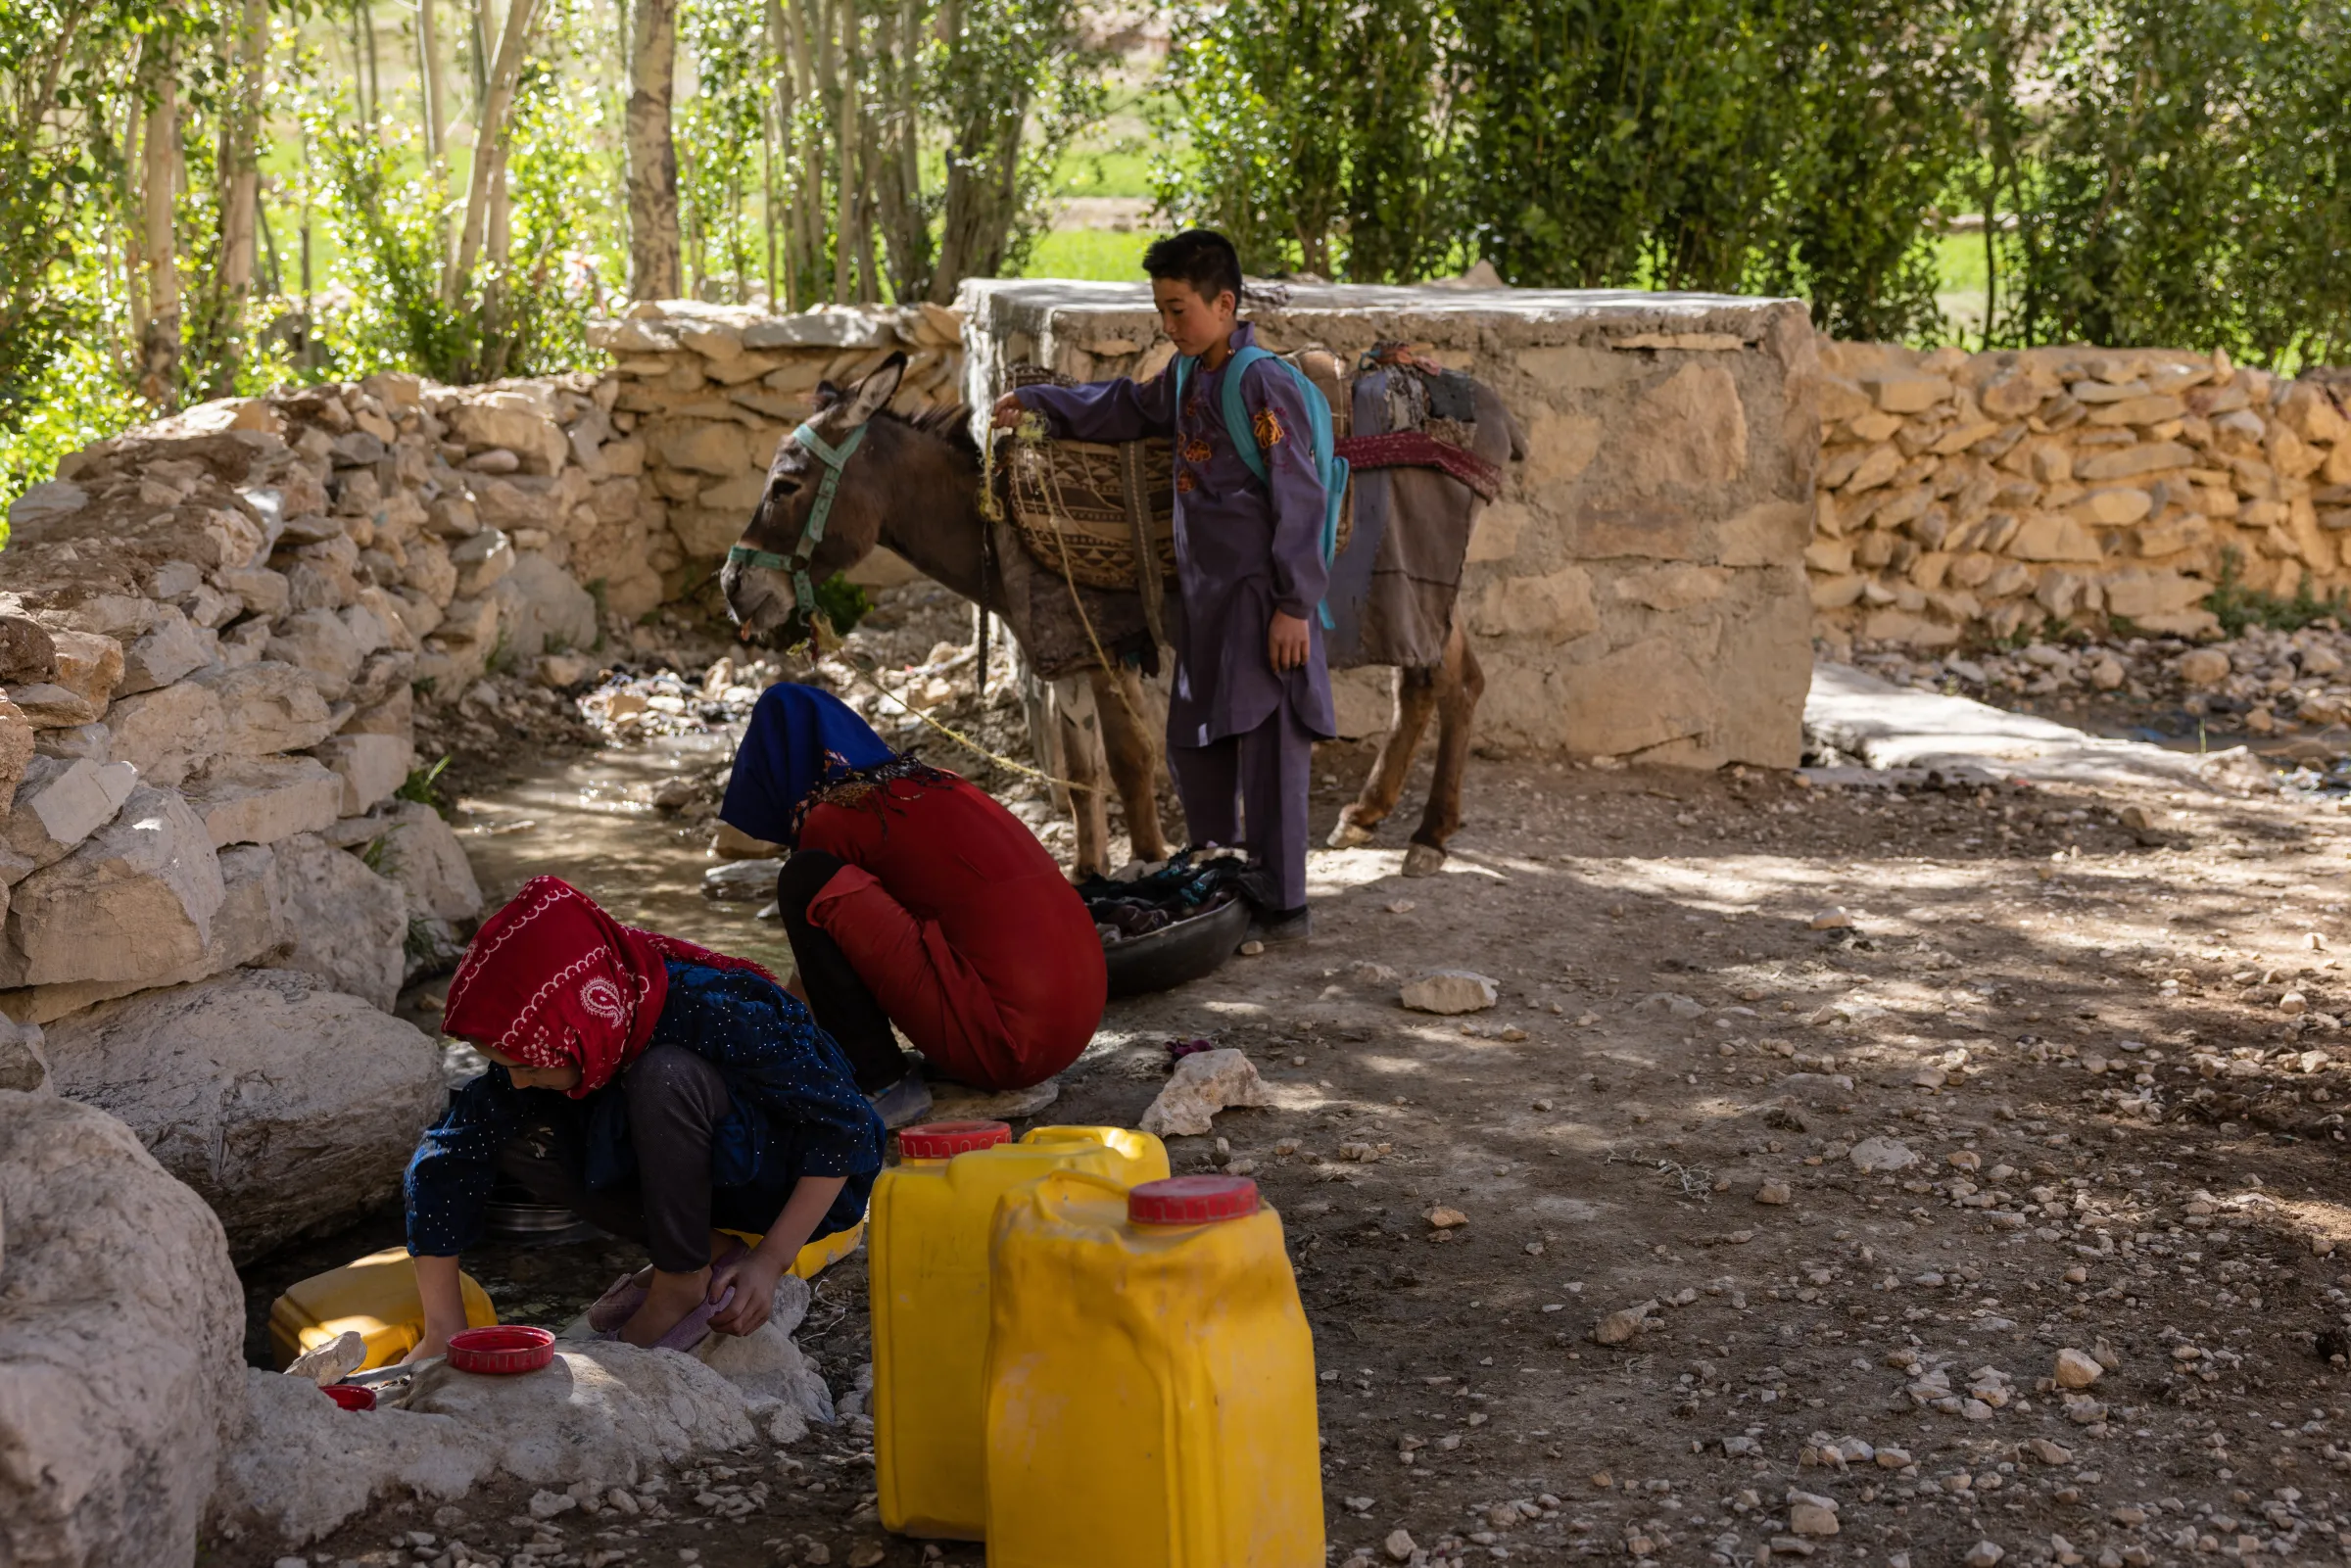 Children fetch water ten minutes from their village as all other water sources have dried up